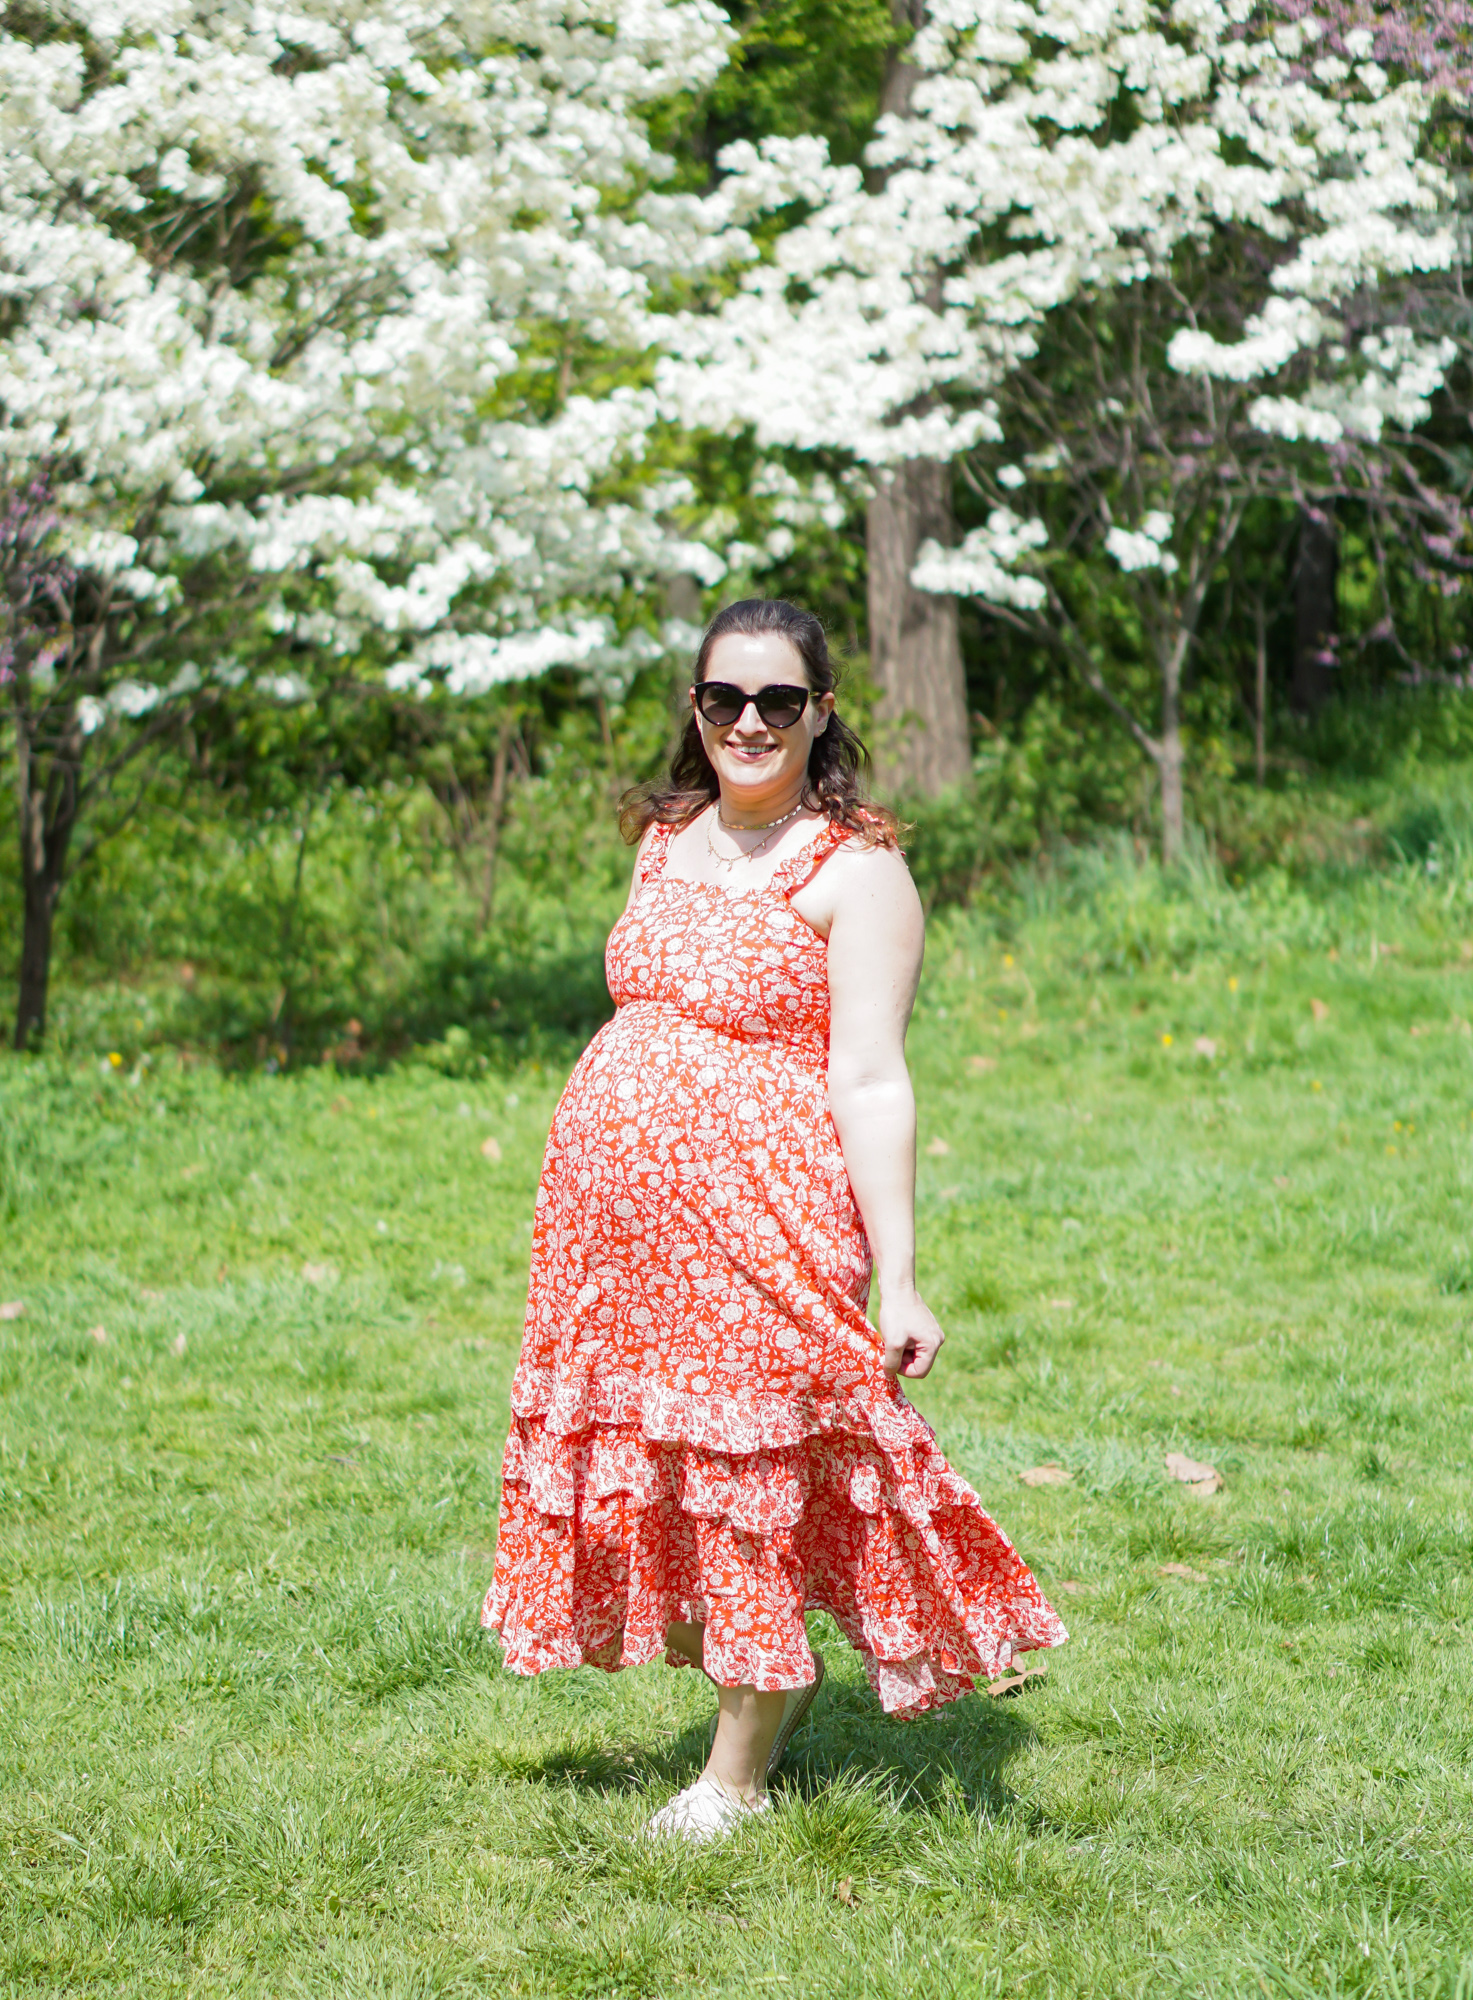 Red and white floral dress